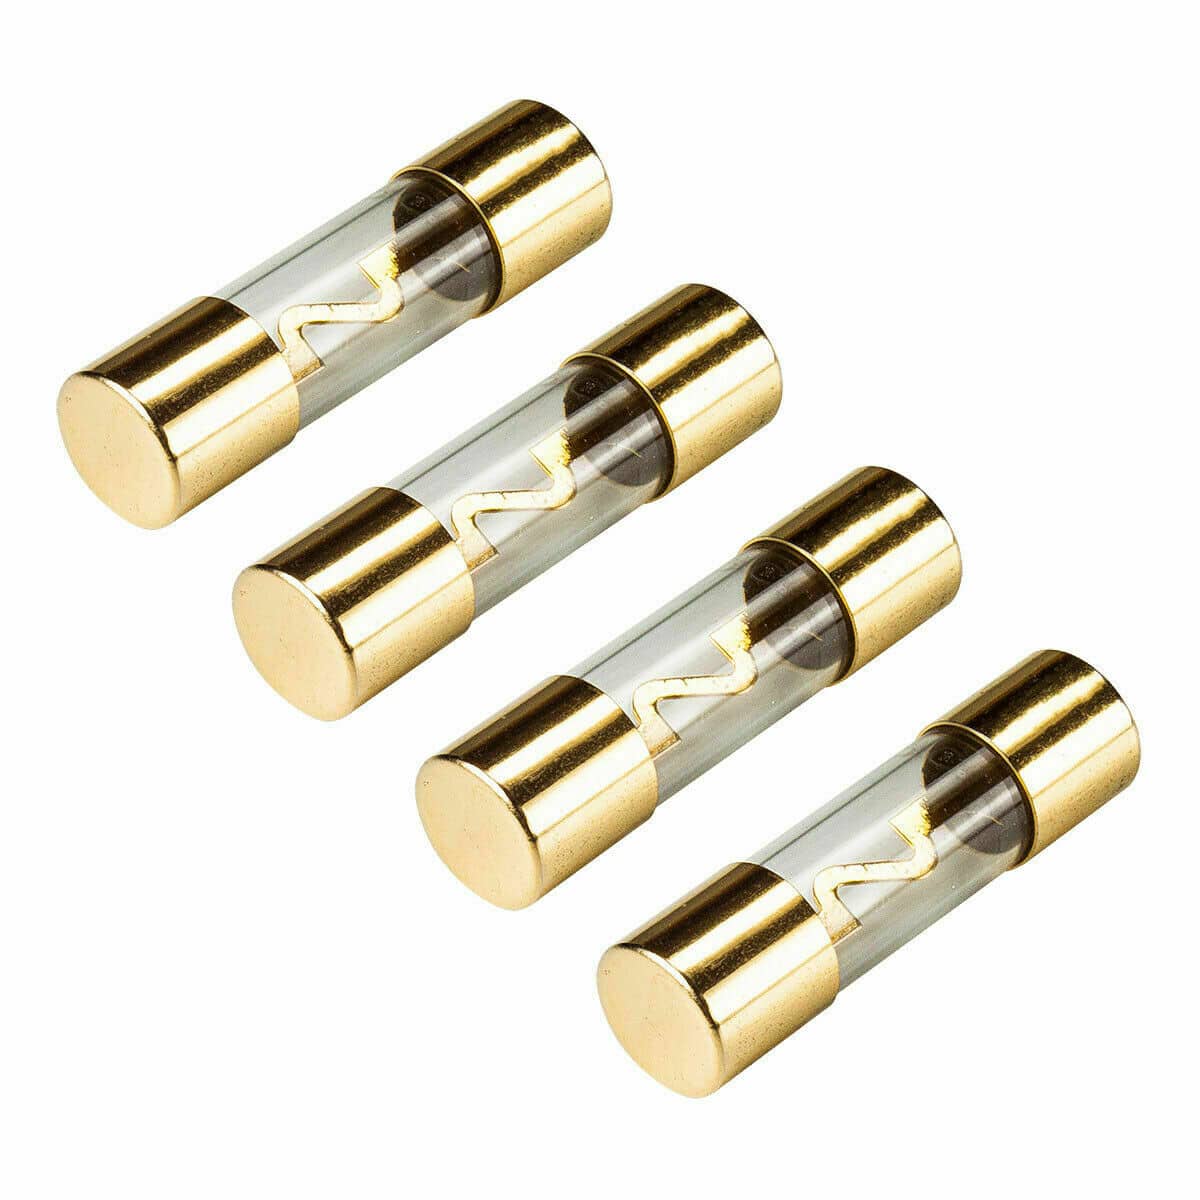 5pcs Car Audio Amp Amplifier Glass 50 A AMP AGU Gold Plated Free Shipping